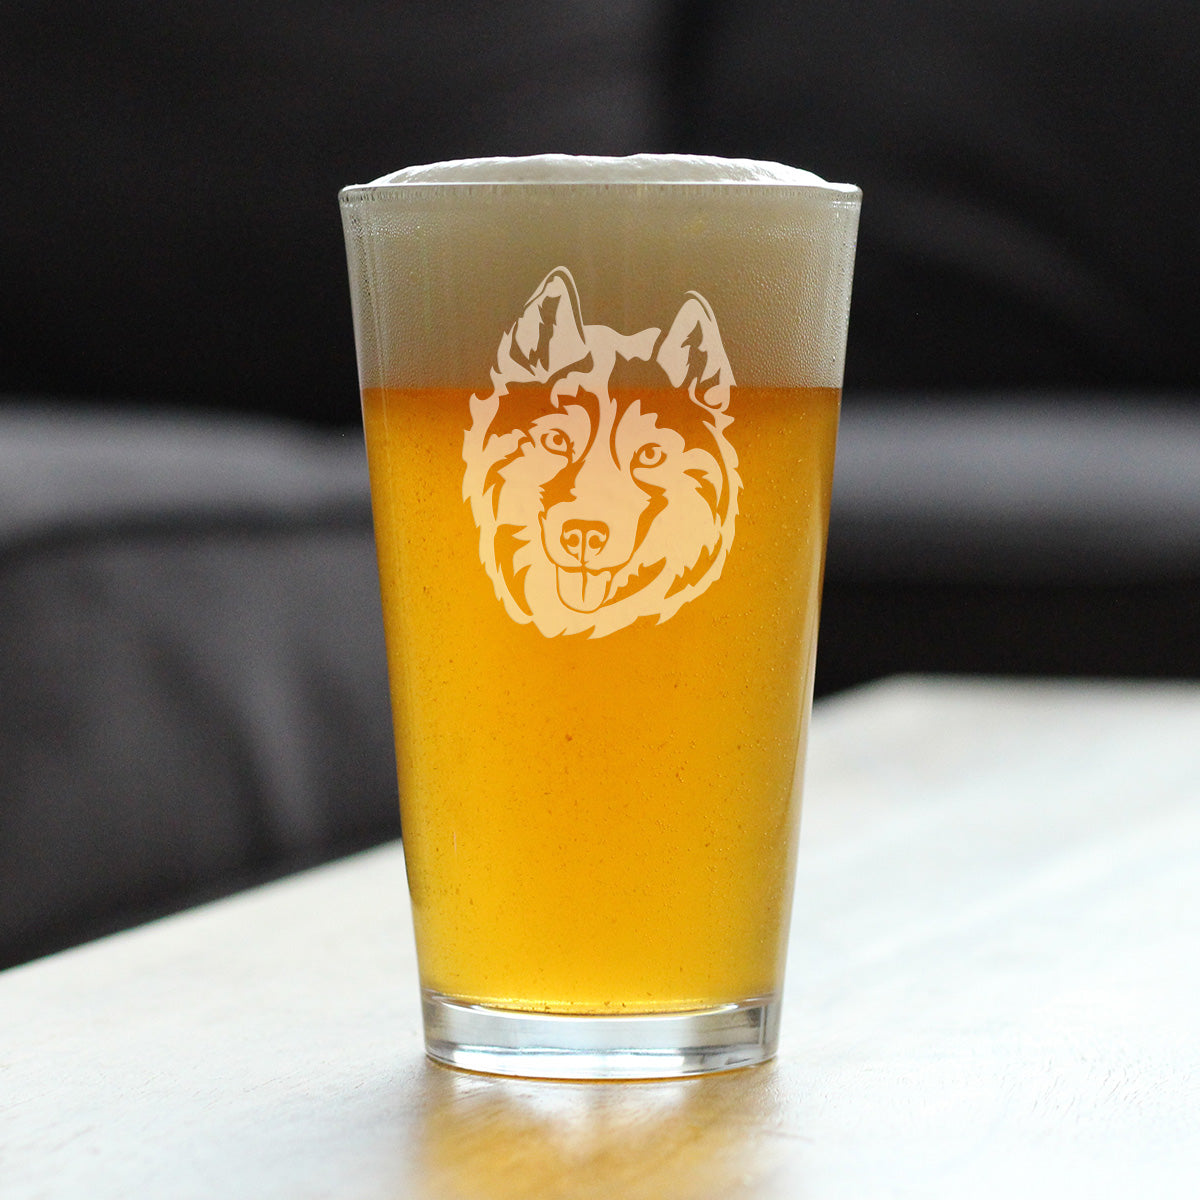 Siberian Husky Face Pint Glass for Beer - Unique Dog Themed Decor and Gifts for Moms &amp; Dads of Huskies - 16 Oz